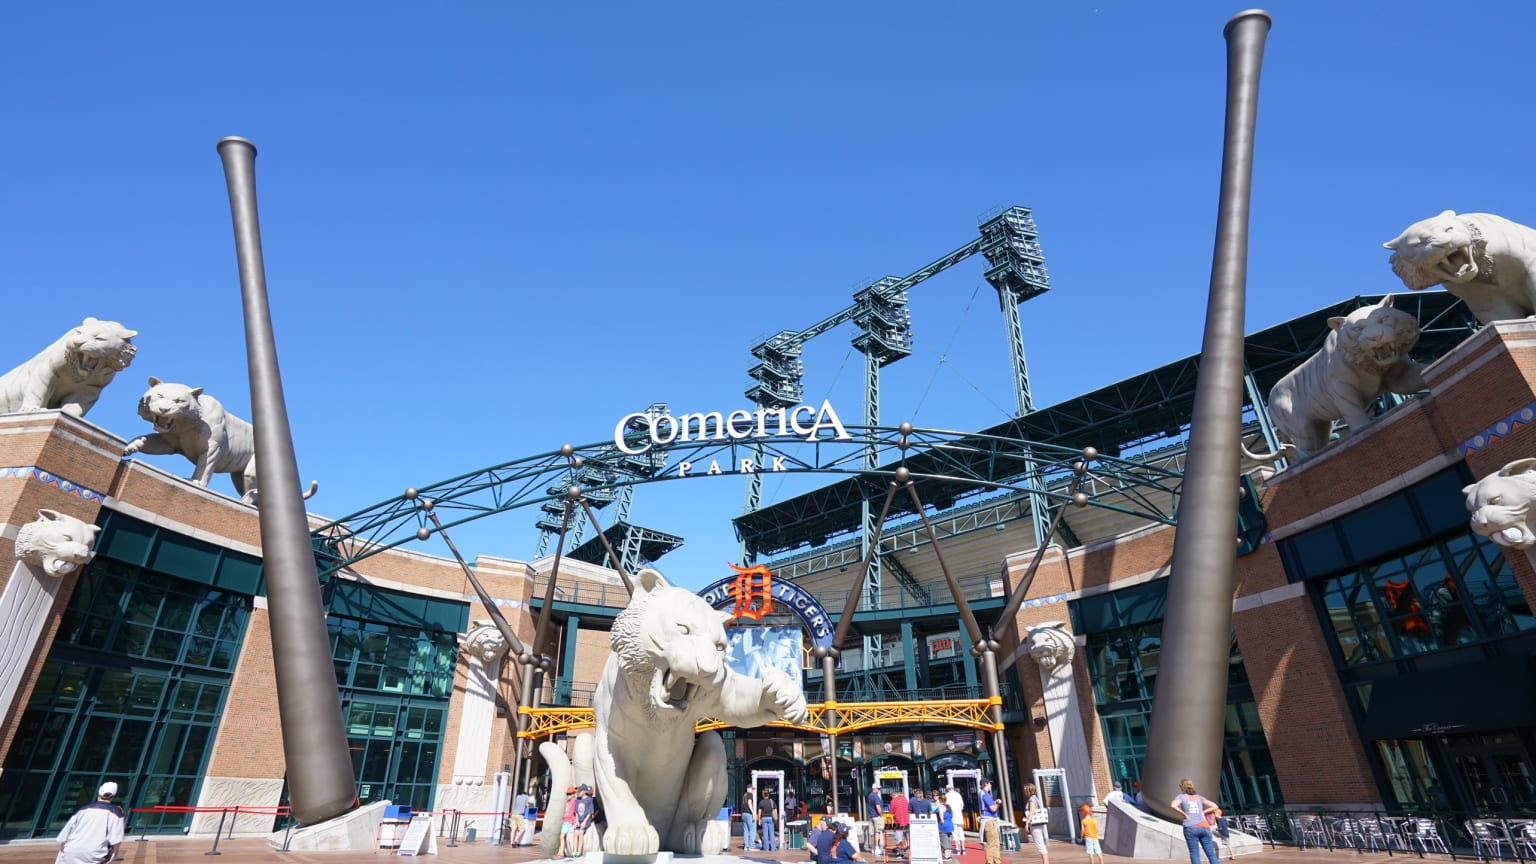 Comerica Park: What you need to know to make it a great day